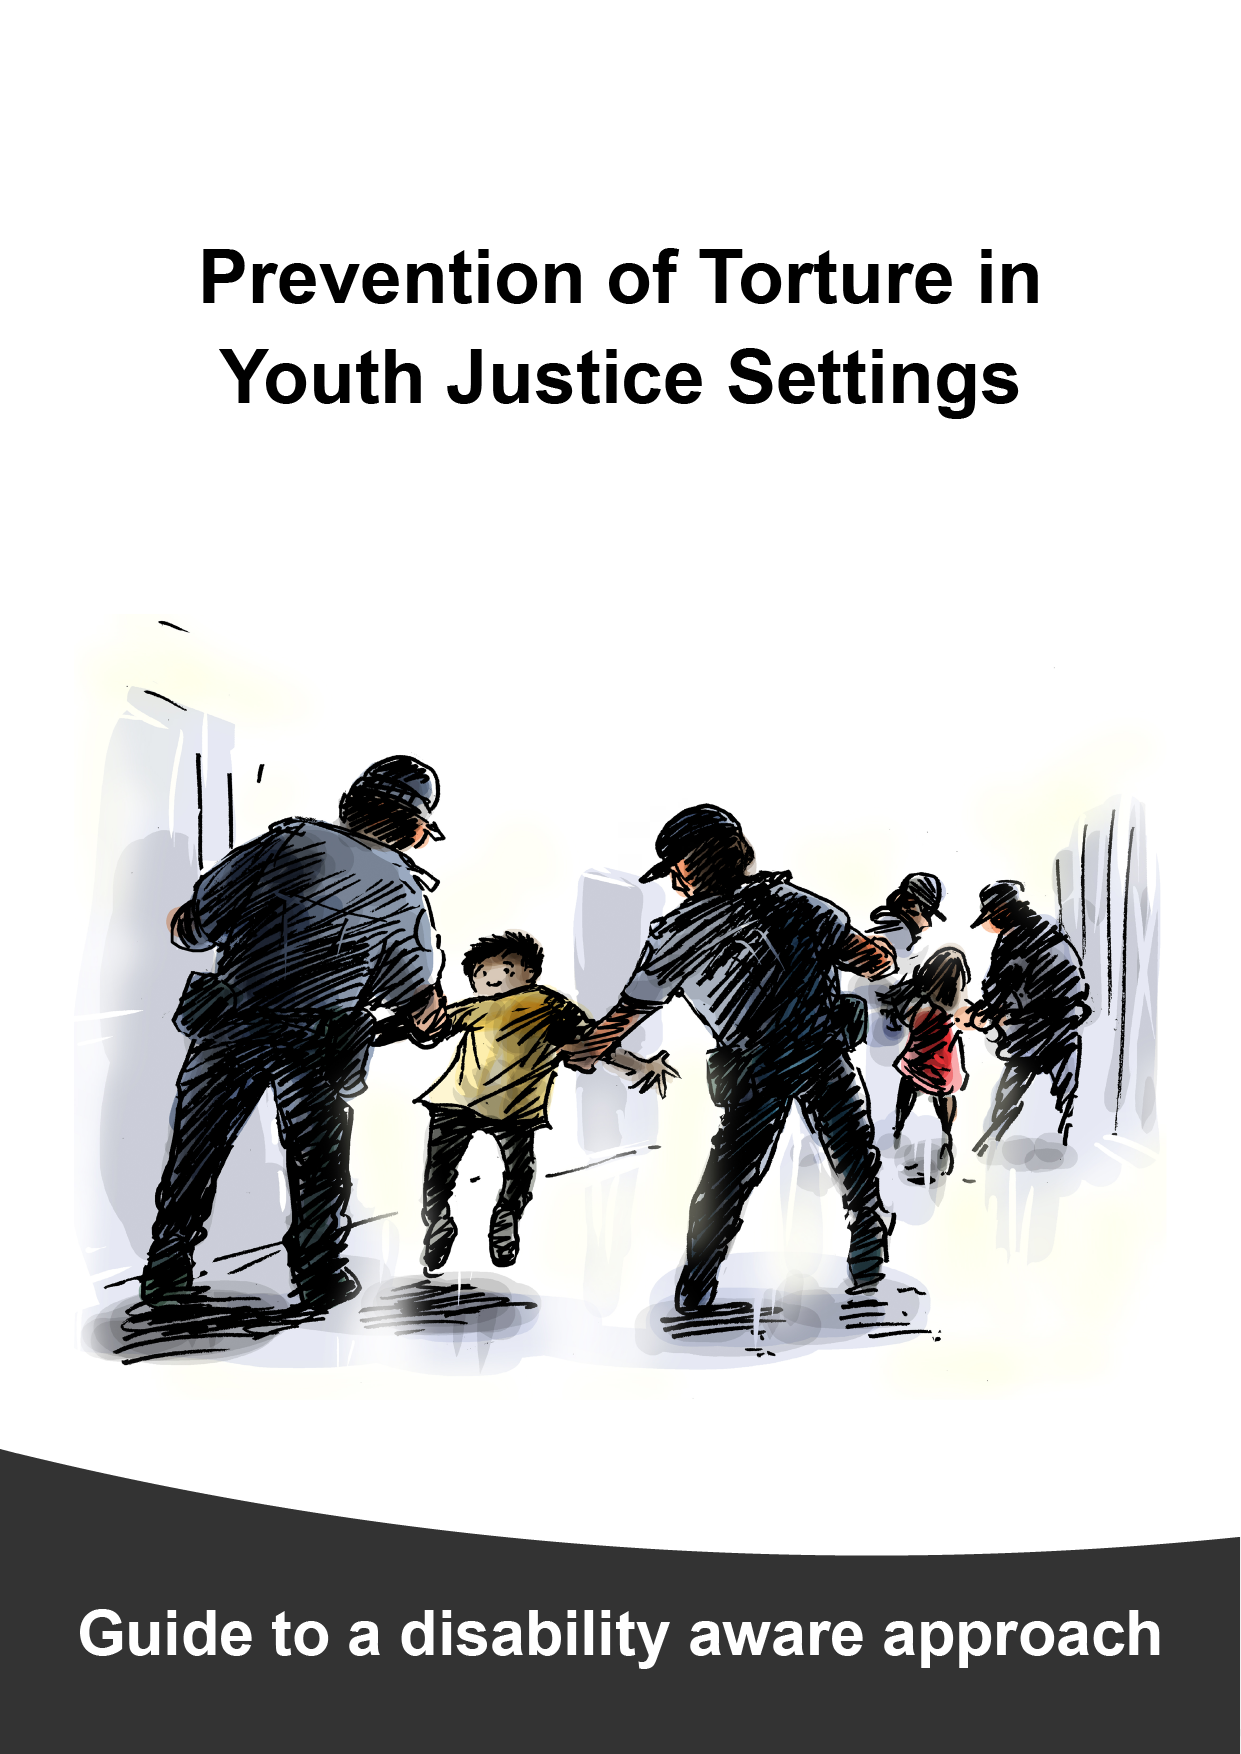 Detailed Guide cover page with title "Prevention of Torture in Youth Justice Settings" with illustration of a boy being carried down a hallway by 2 police officers who are each holding one of his arms. Sub-heading at the bottom says, “Guide to a disability aware approach”.